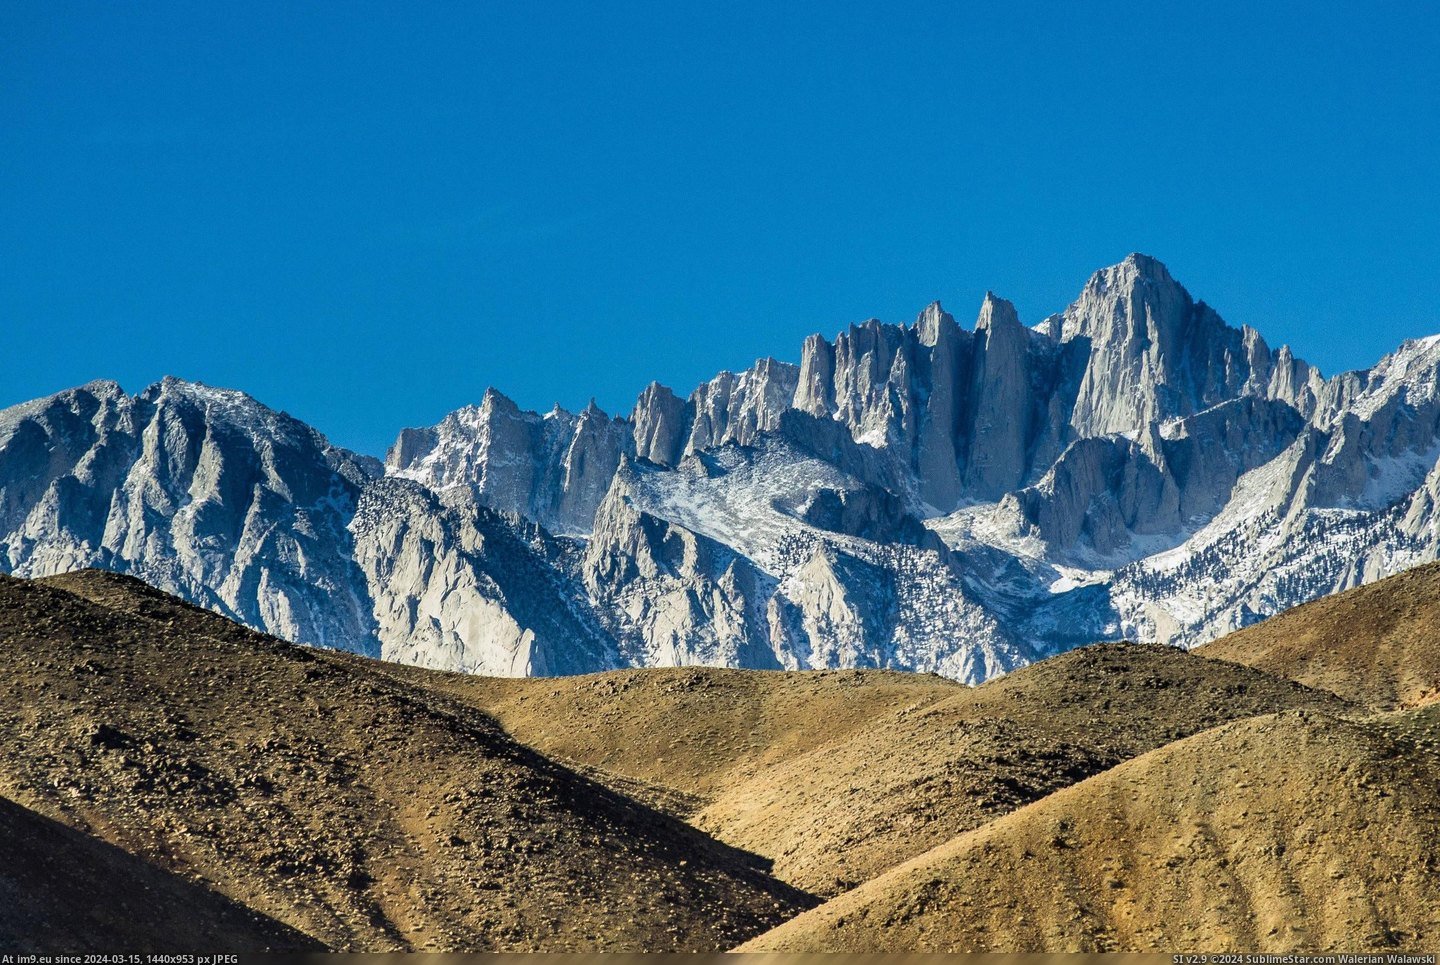 #States #Mount #Whitney #Elevation #Point #Highest [Earthporn] Mount Whitney, CA - Elevation 14,505, Prominence 10,079 - The highest point in the lower 48 states [2429x1619] Pic. (Bild von album My r/EARTHPORN favs))